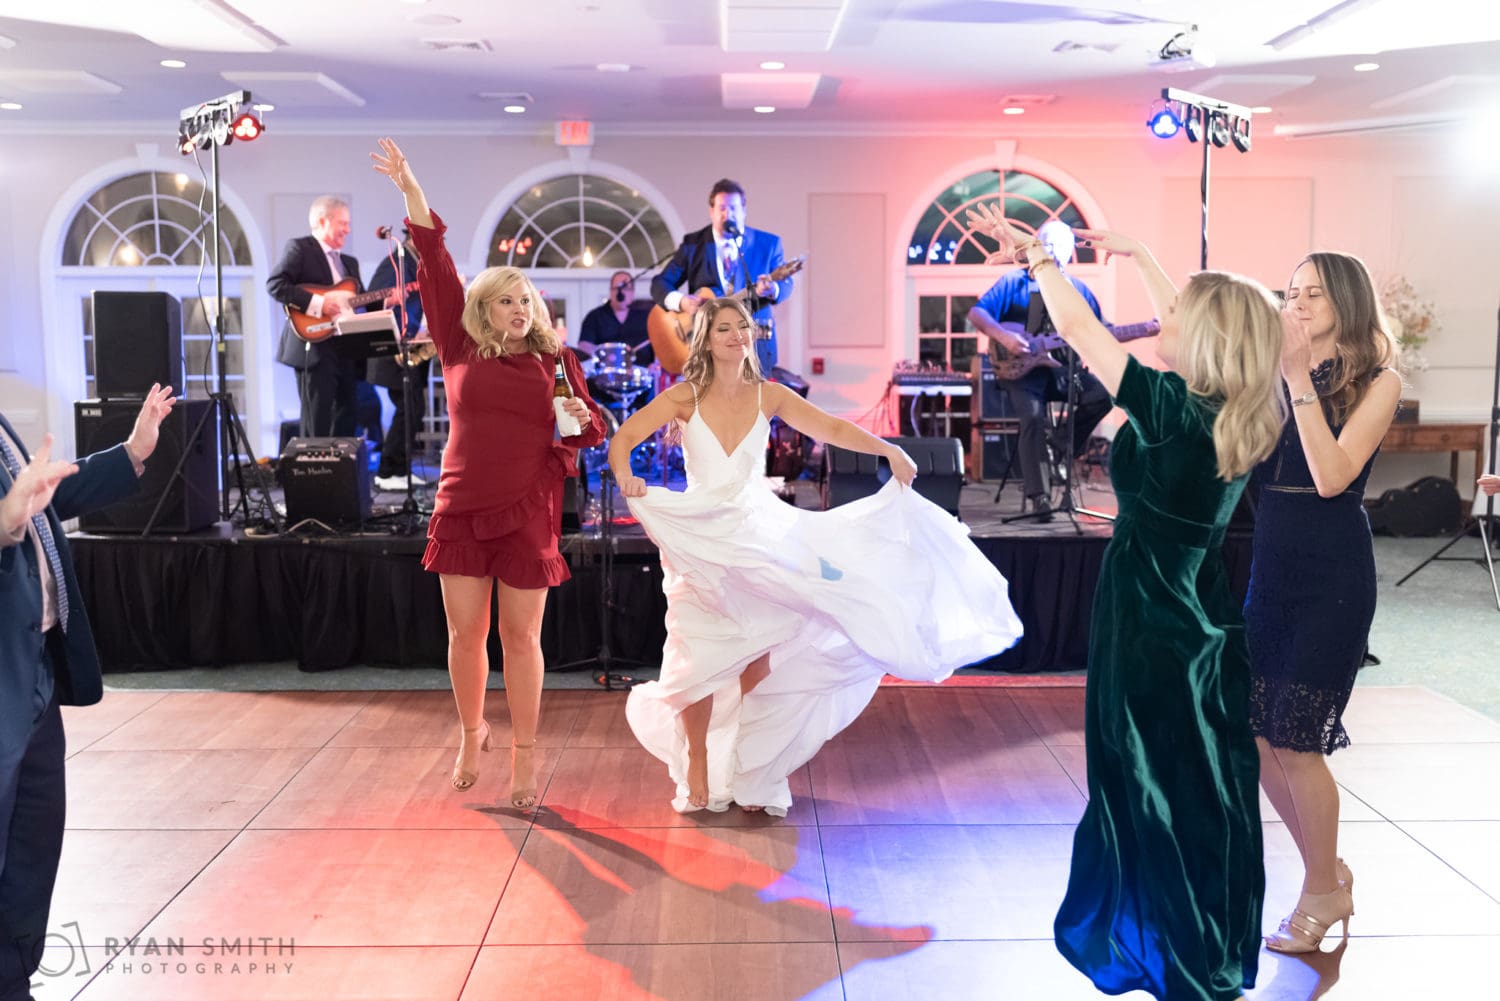 More fun dancing with the full band - Kimbel's - Wachesaw Plantation